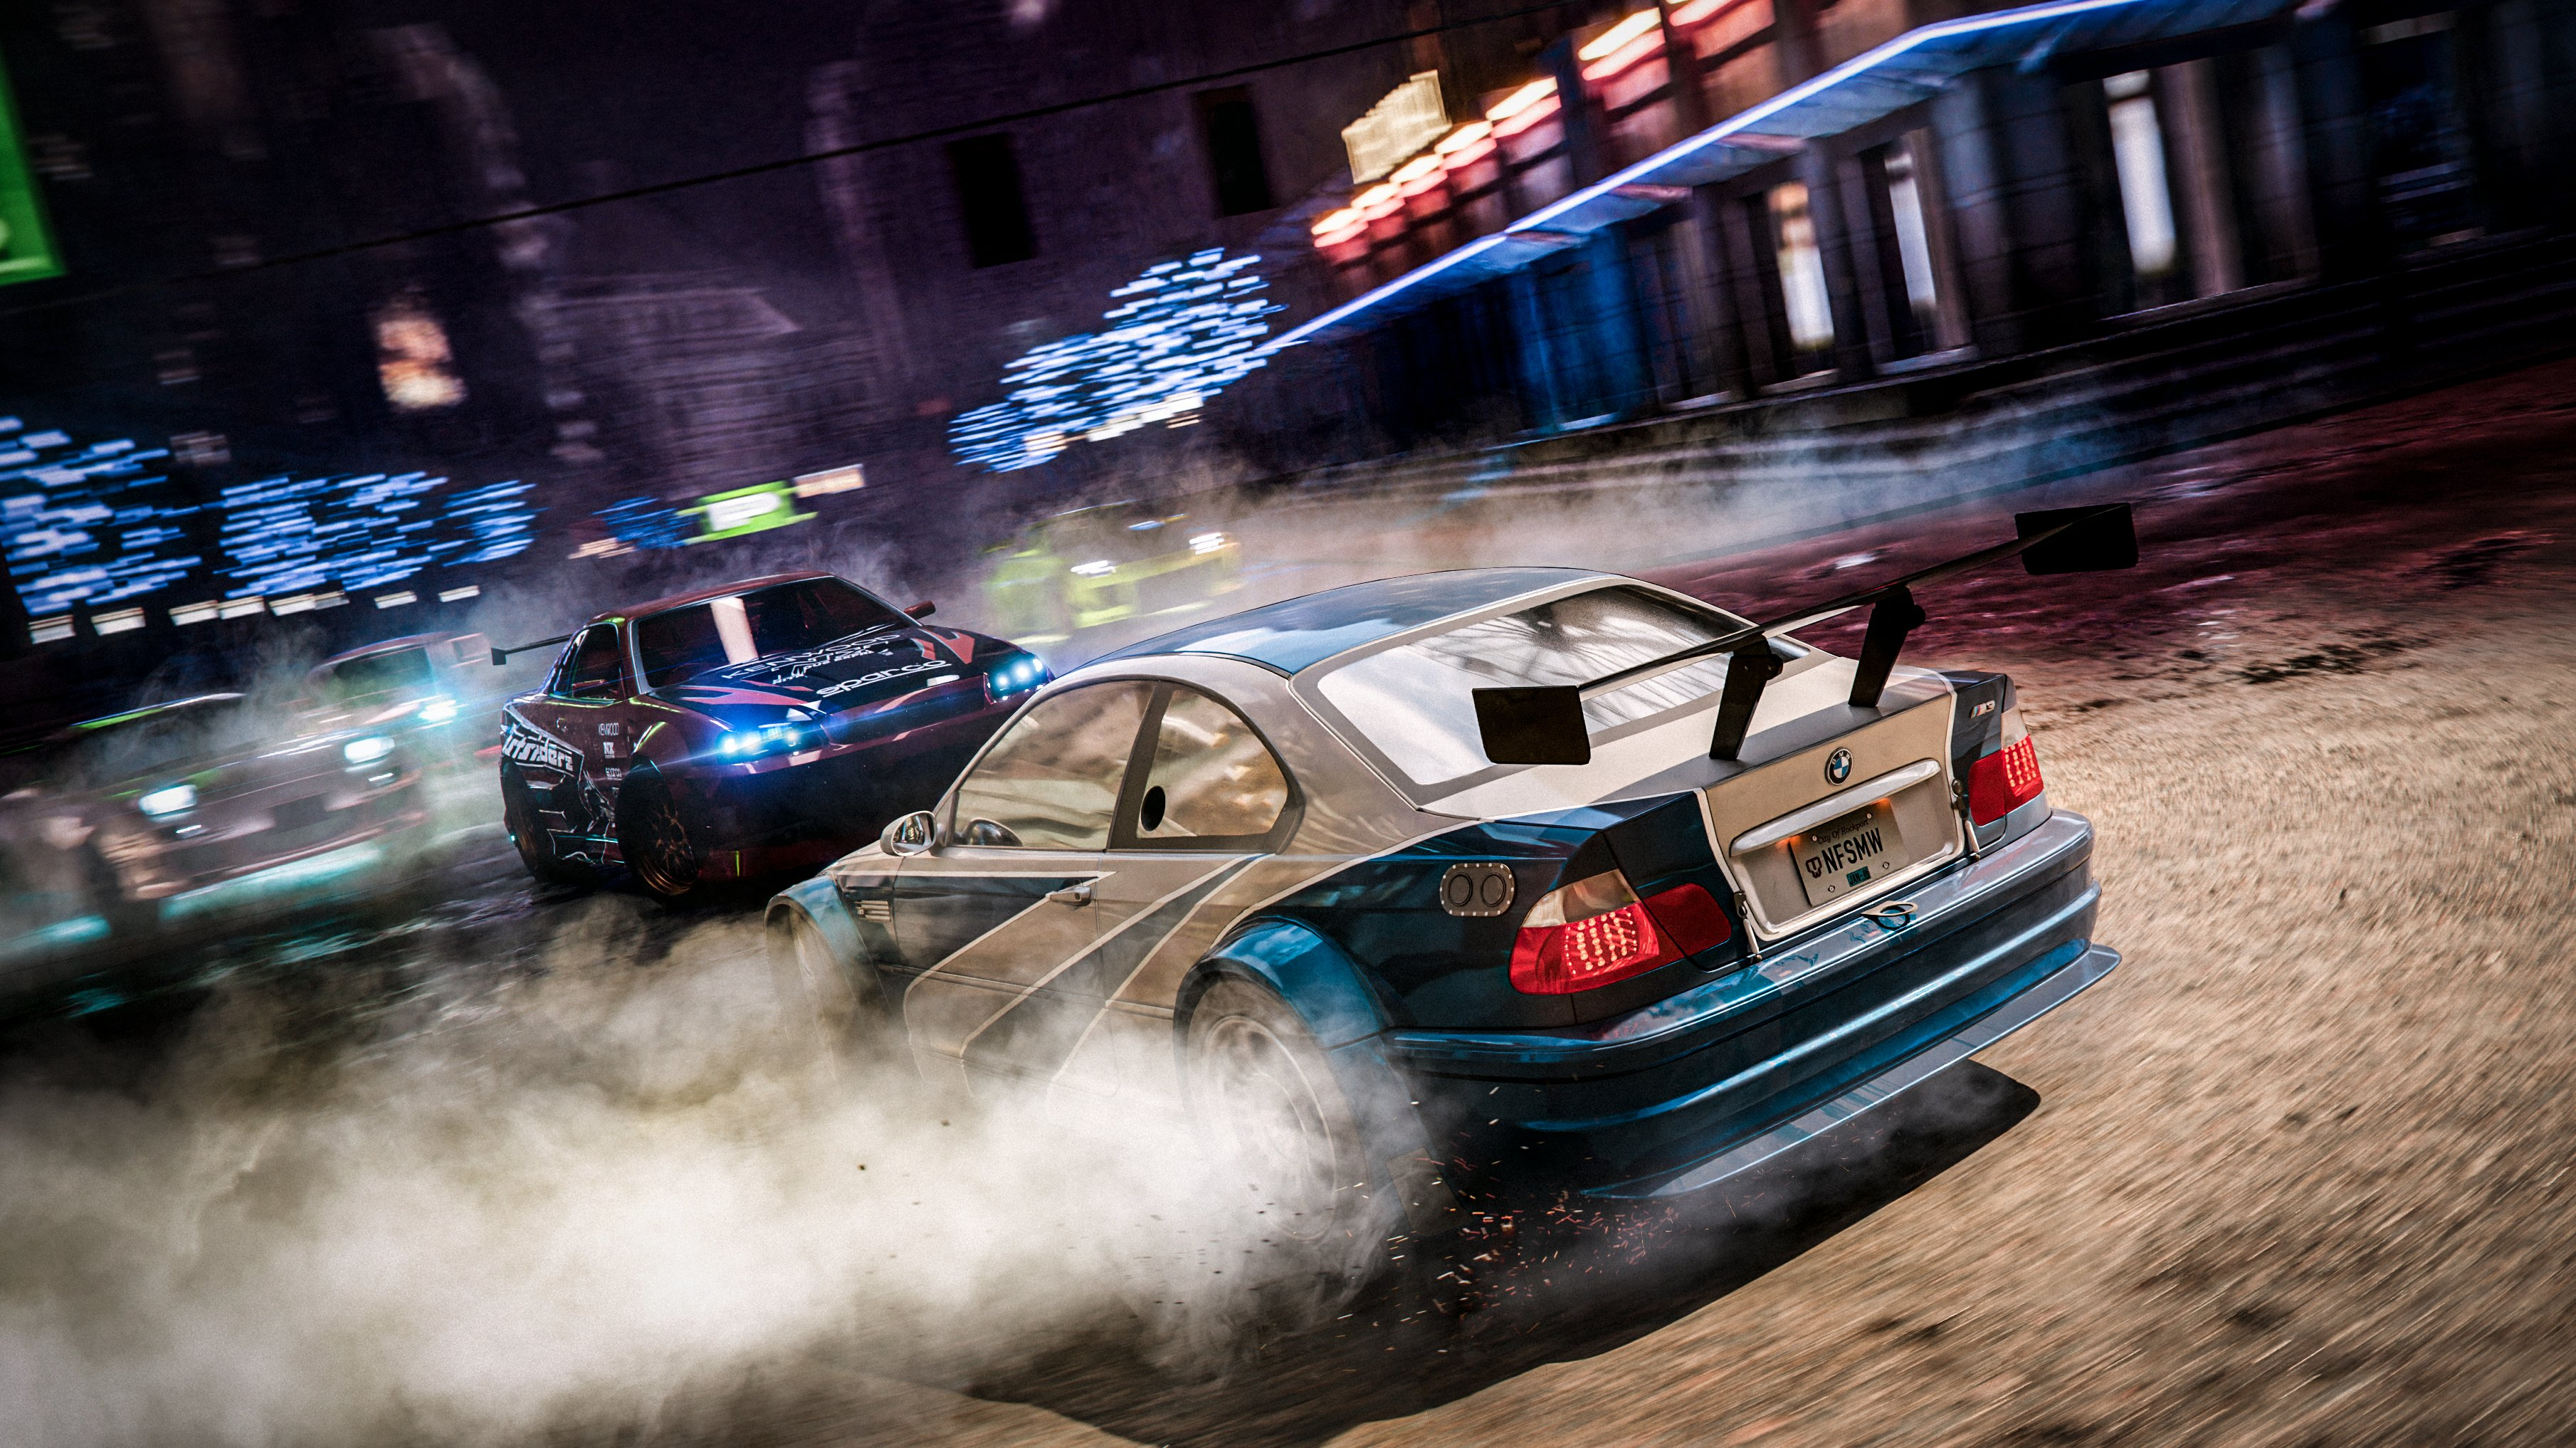 3619x2034 Need for Speed: Most Wanted, Underground 1/2, Carbon, CGI Recreations by Darudnik [3840x2160] : r/wallpapers